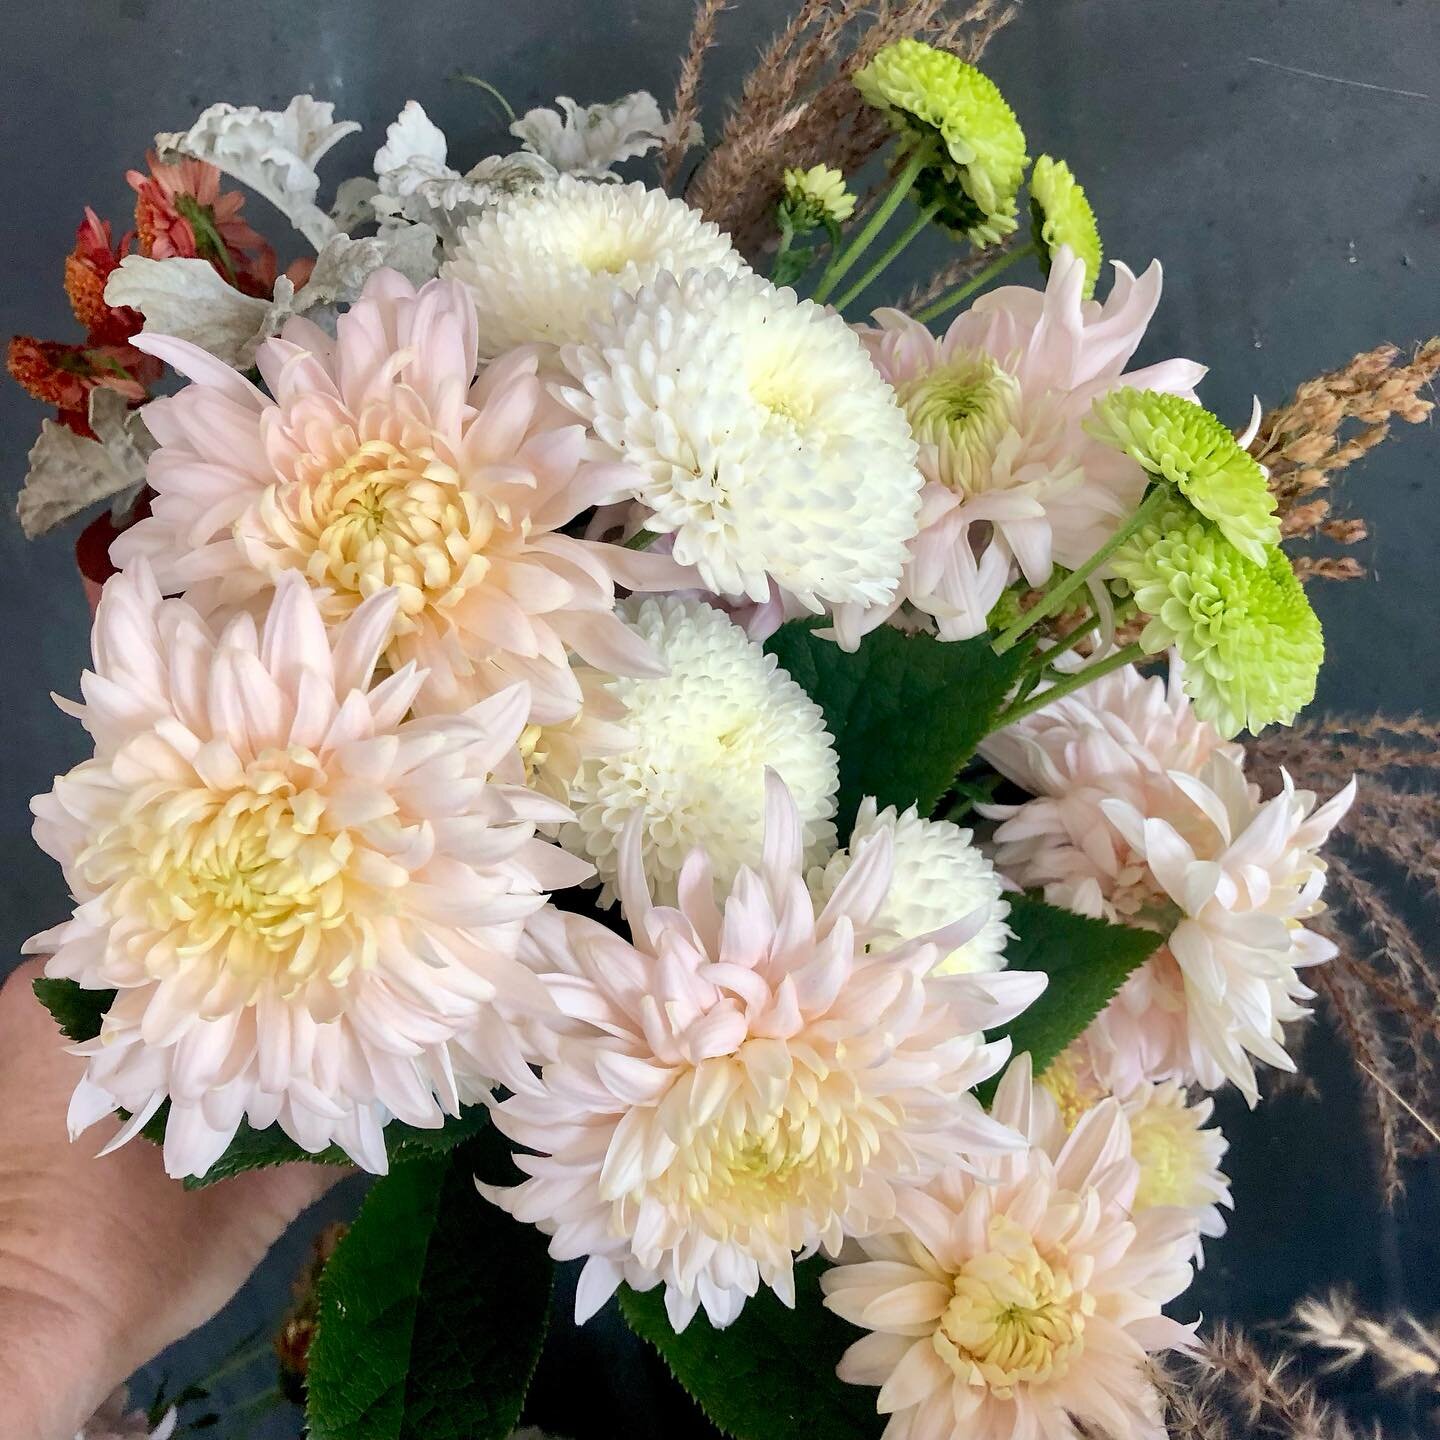 Our last fresh blooms of the year are the heirloom chrysanthemums&hellip; beautiful, great vase life.  Also today in the farmstand, lots of salad greens, spinach, kale, carrots, leeks and squash. Open 4-6 today.